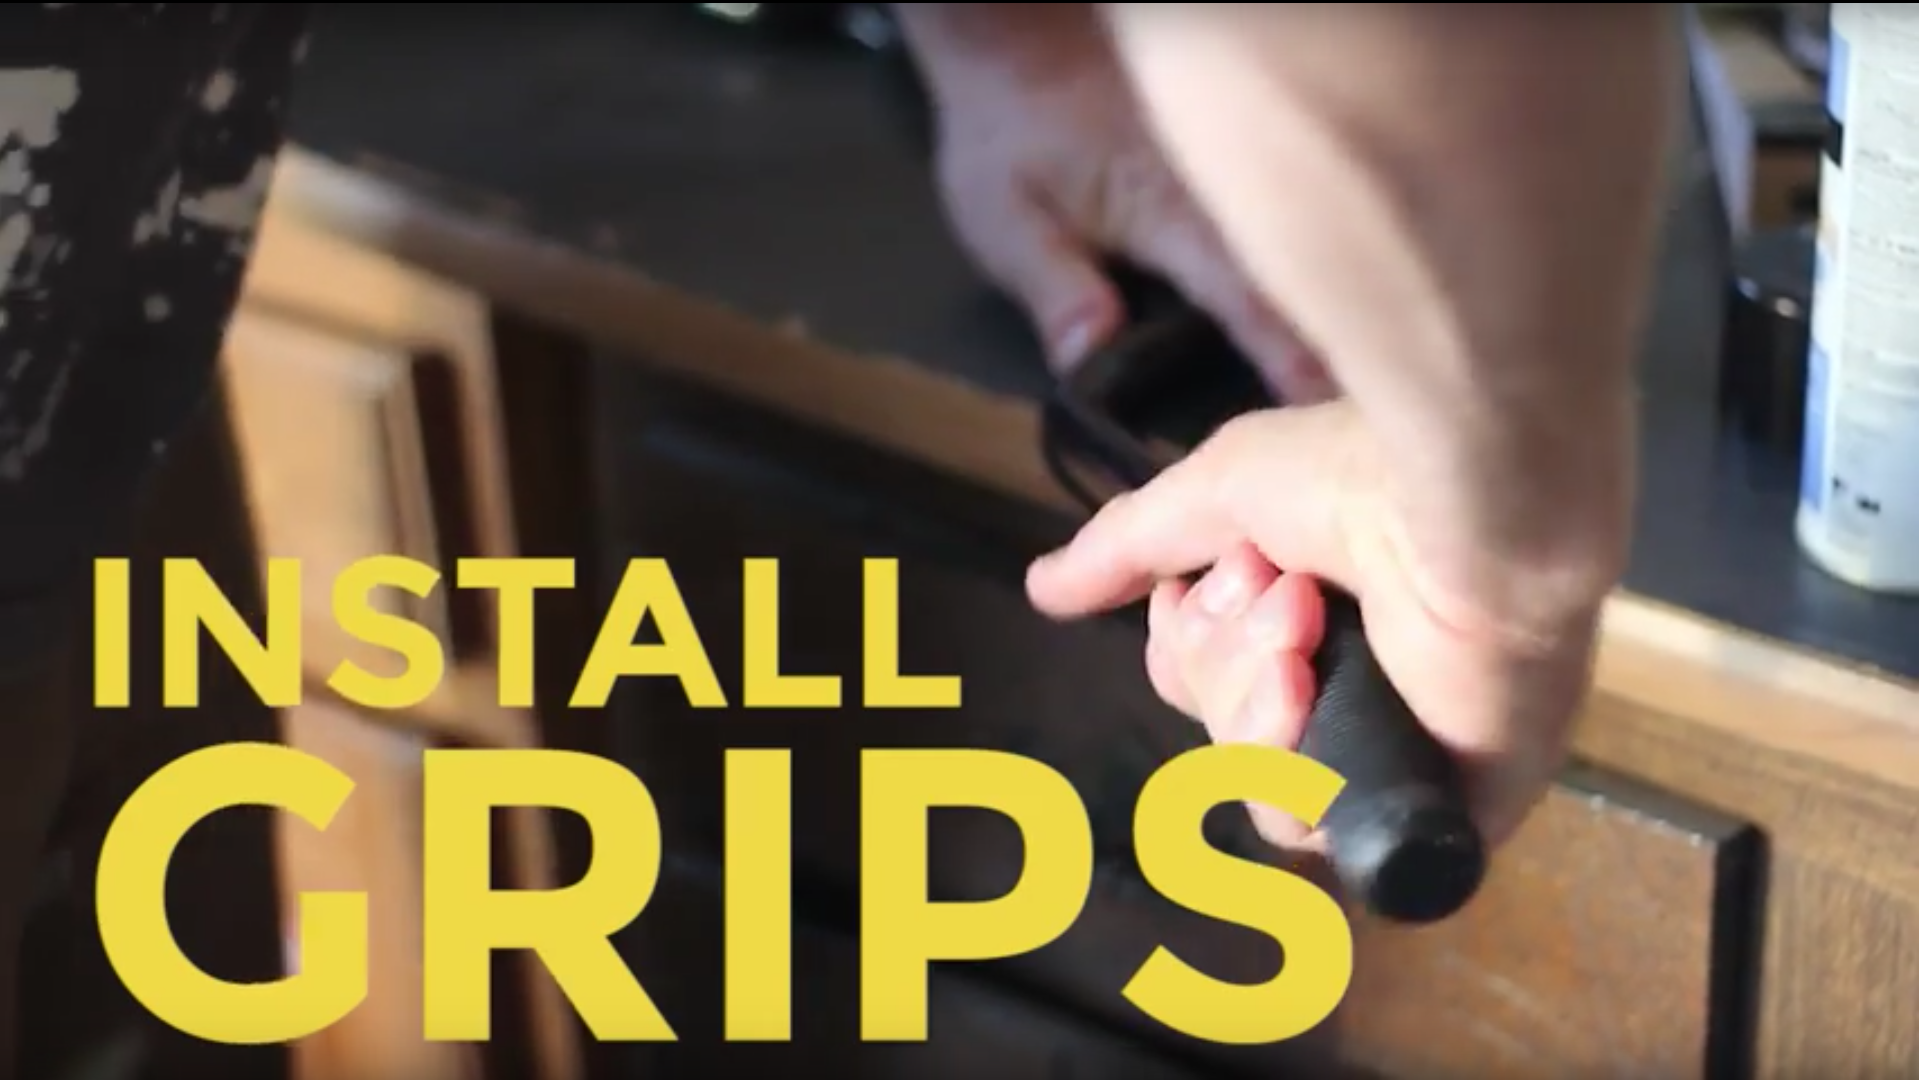 How-To Install Grips with Adam Banton